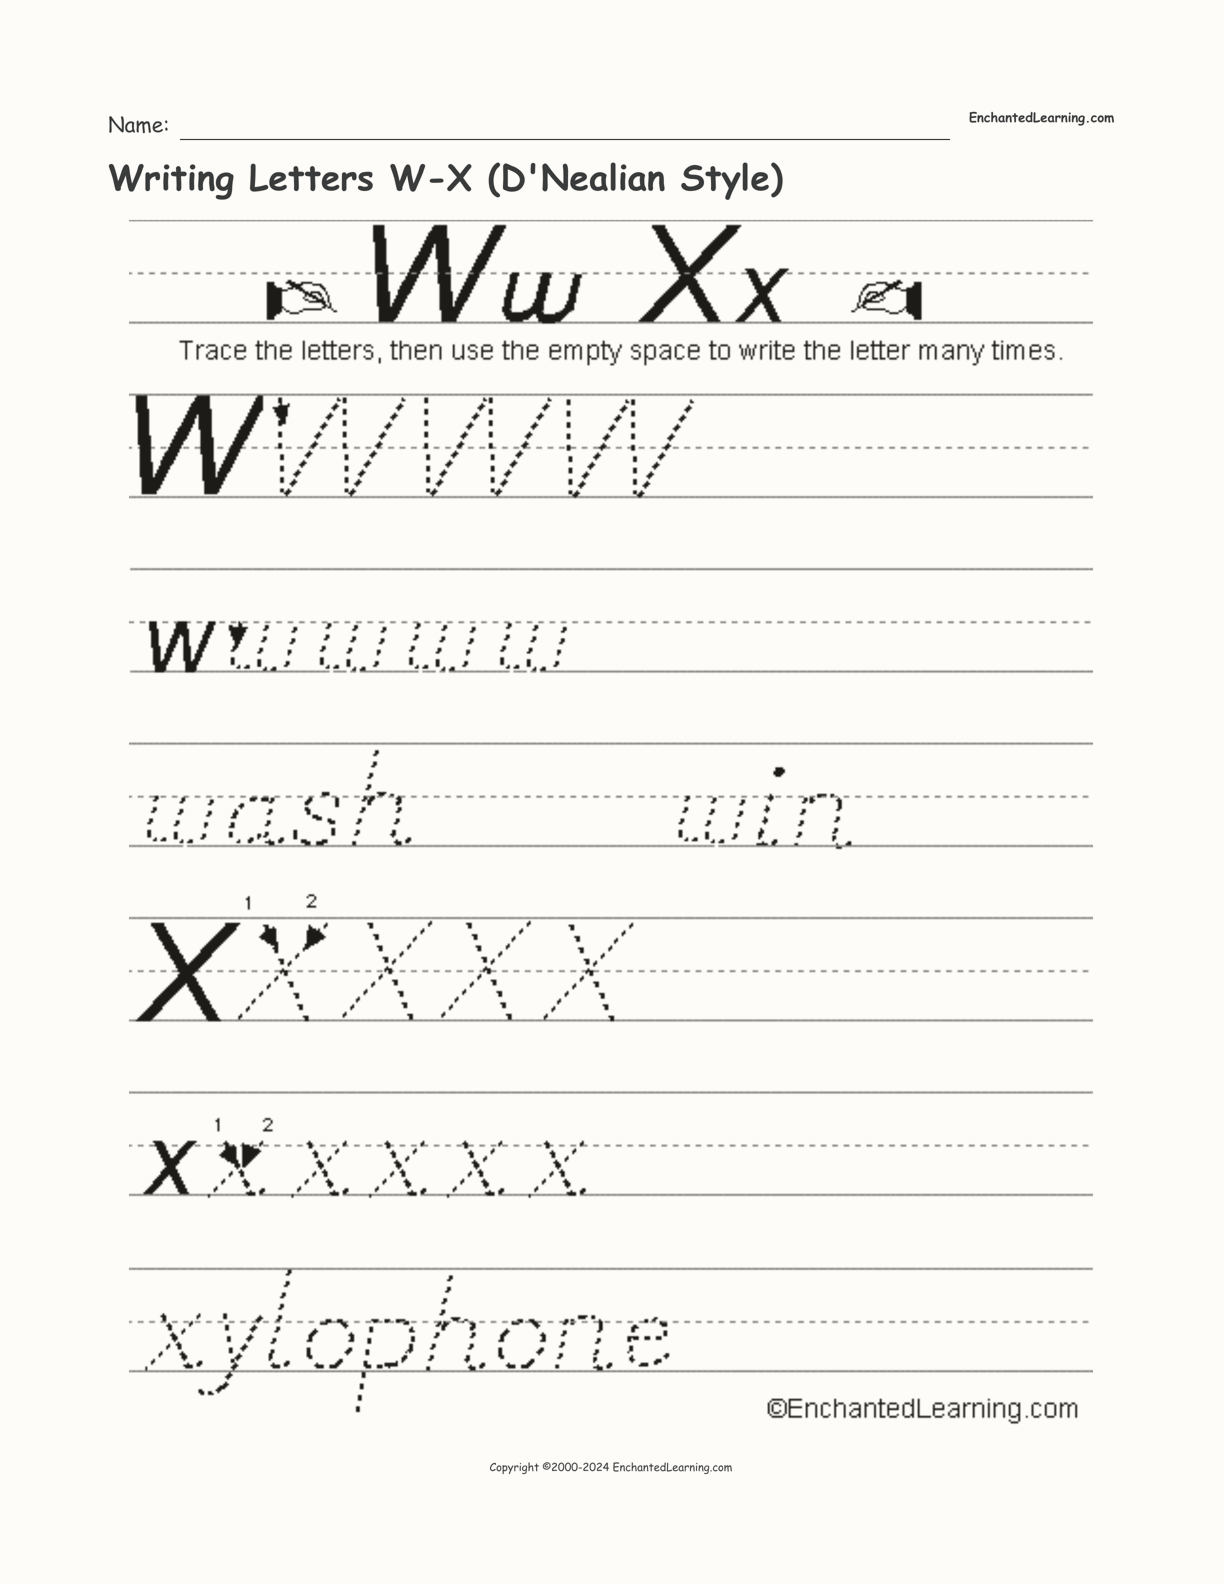 Writing Letters W-X (D'Nealian Style) interactive worksheet page 1